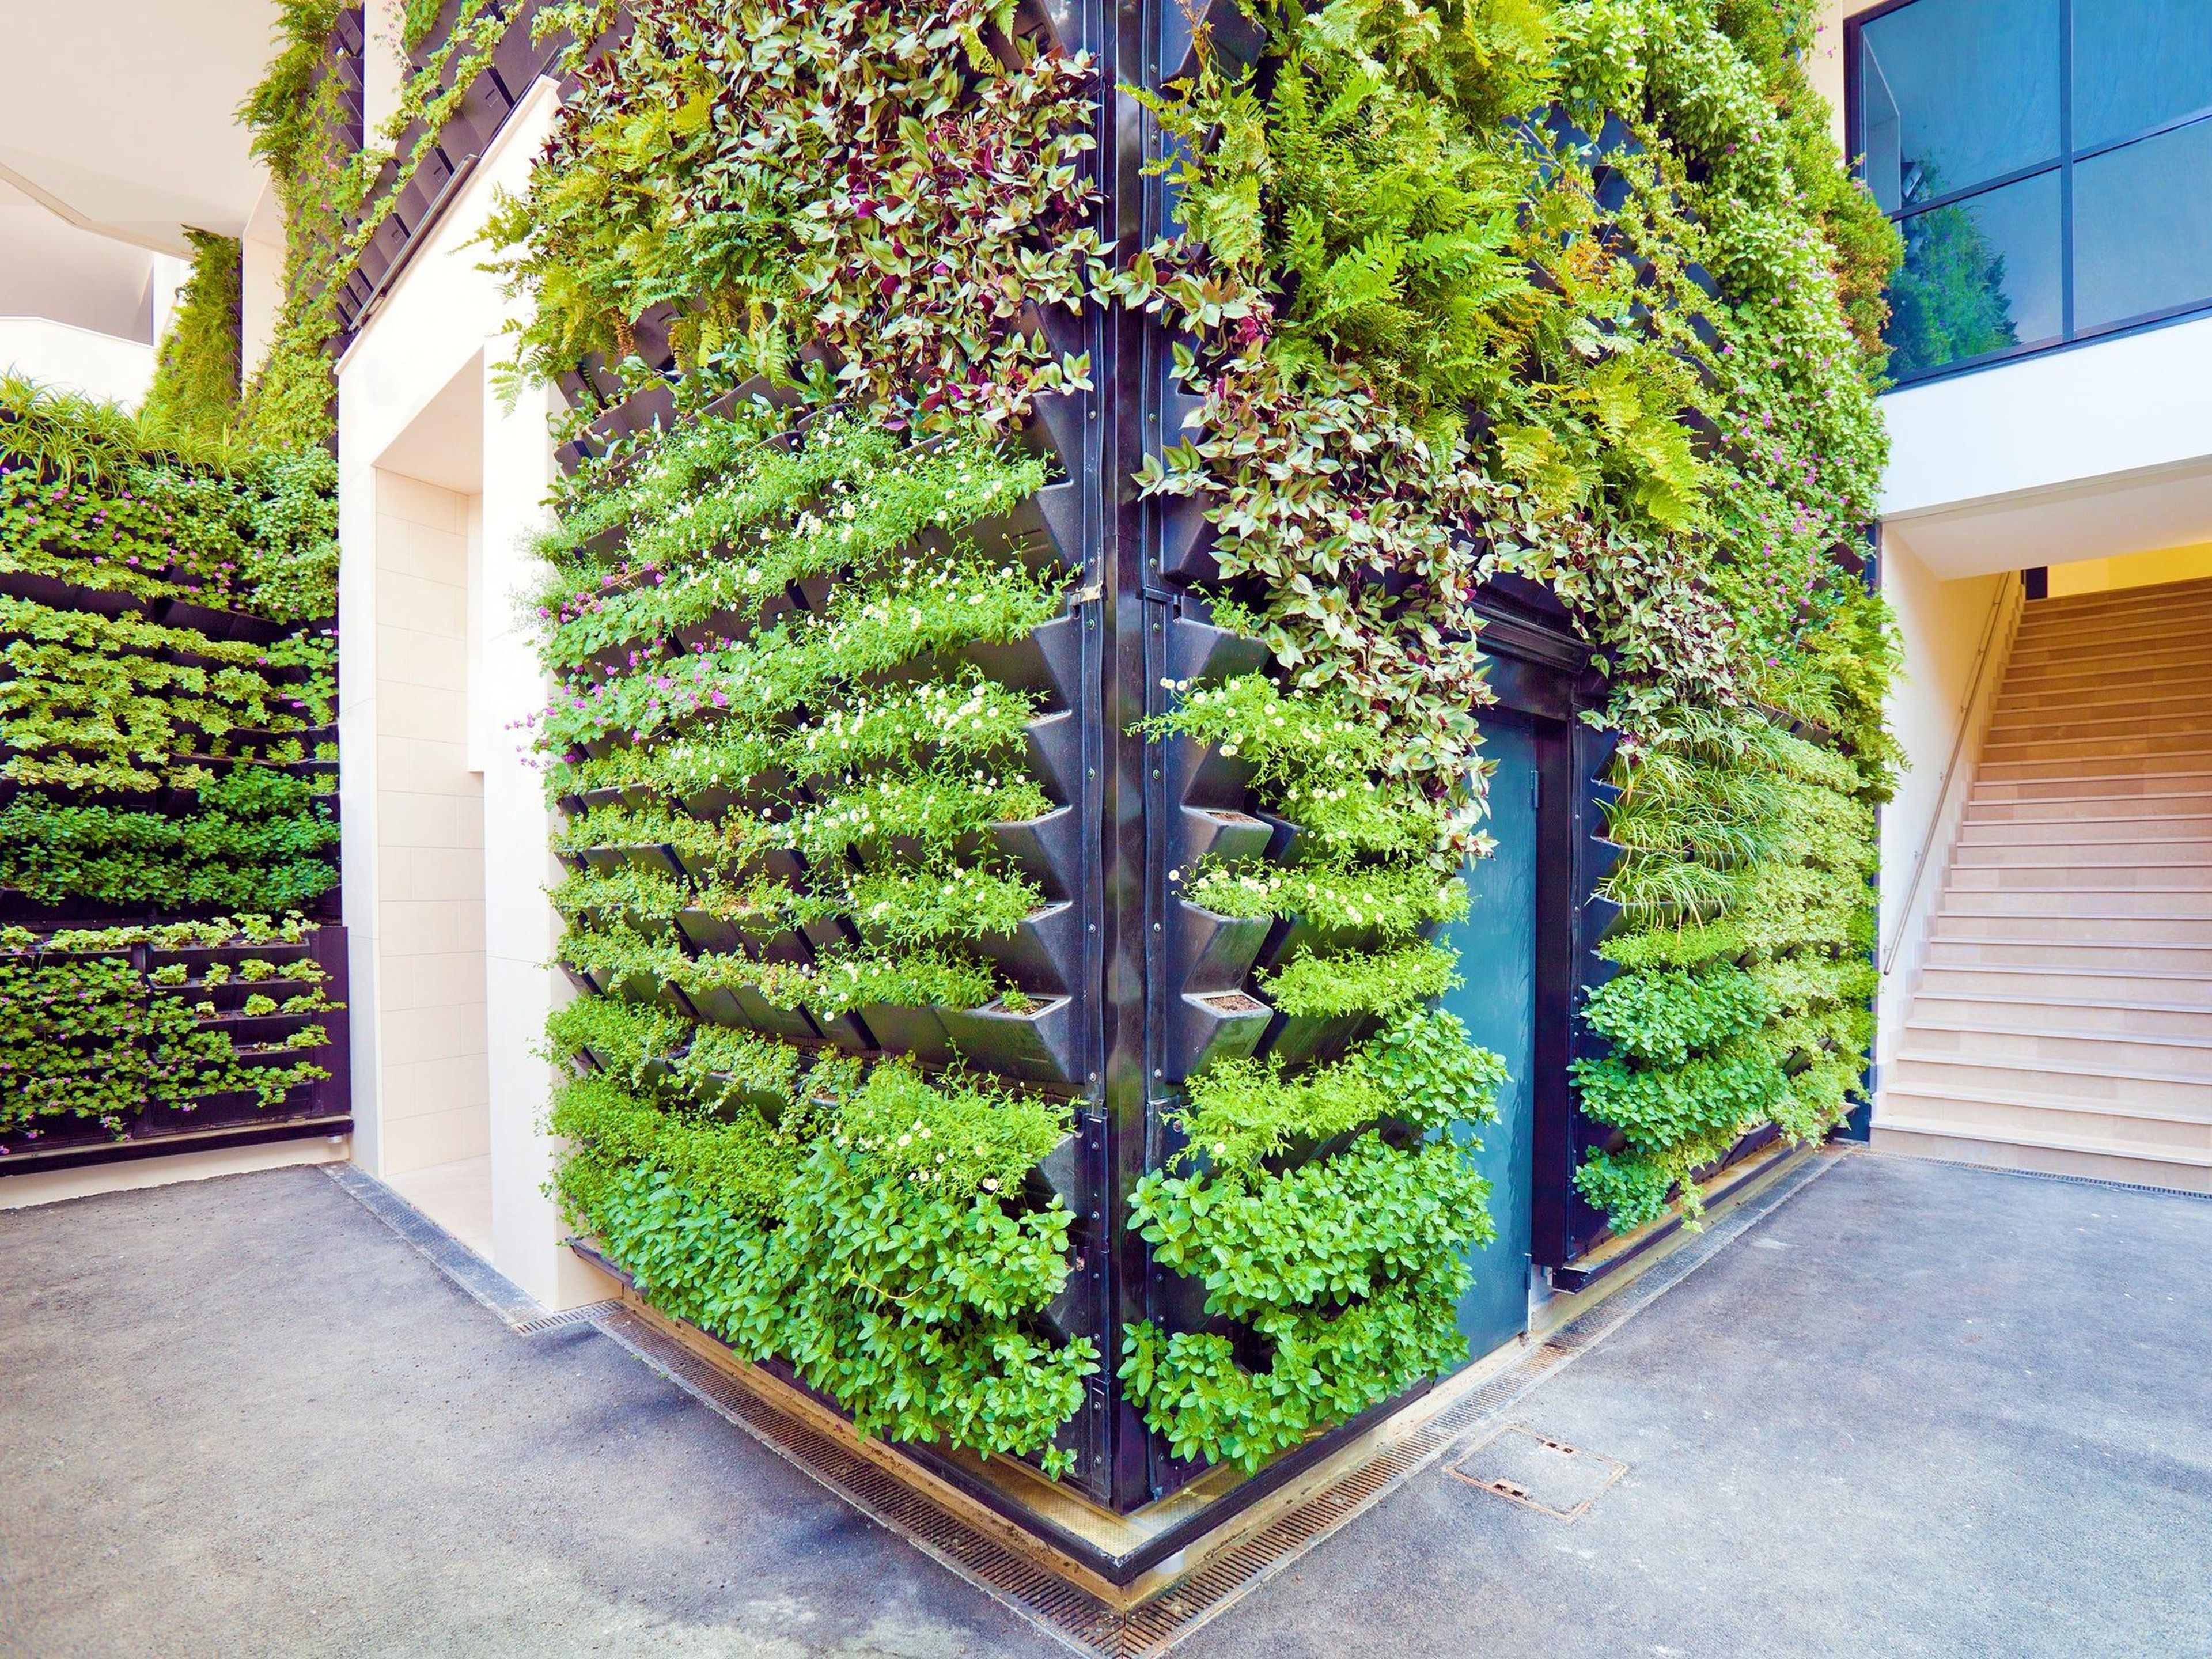 3. Nature will be brought inside via living walls and herb gardens